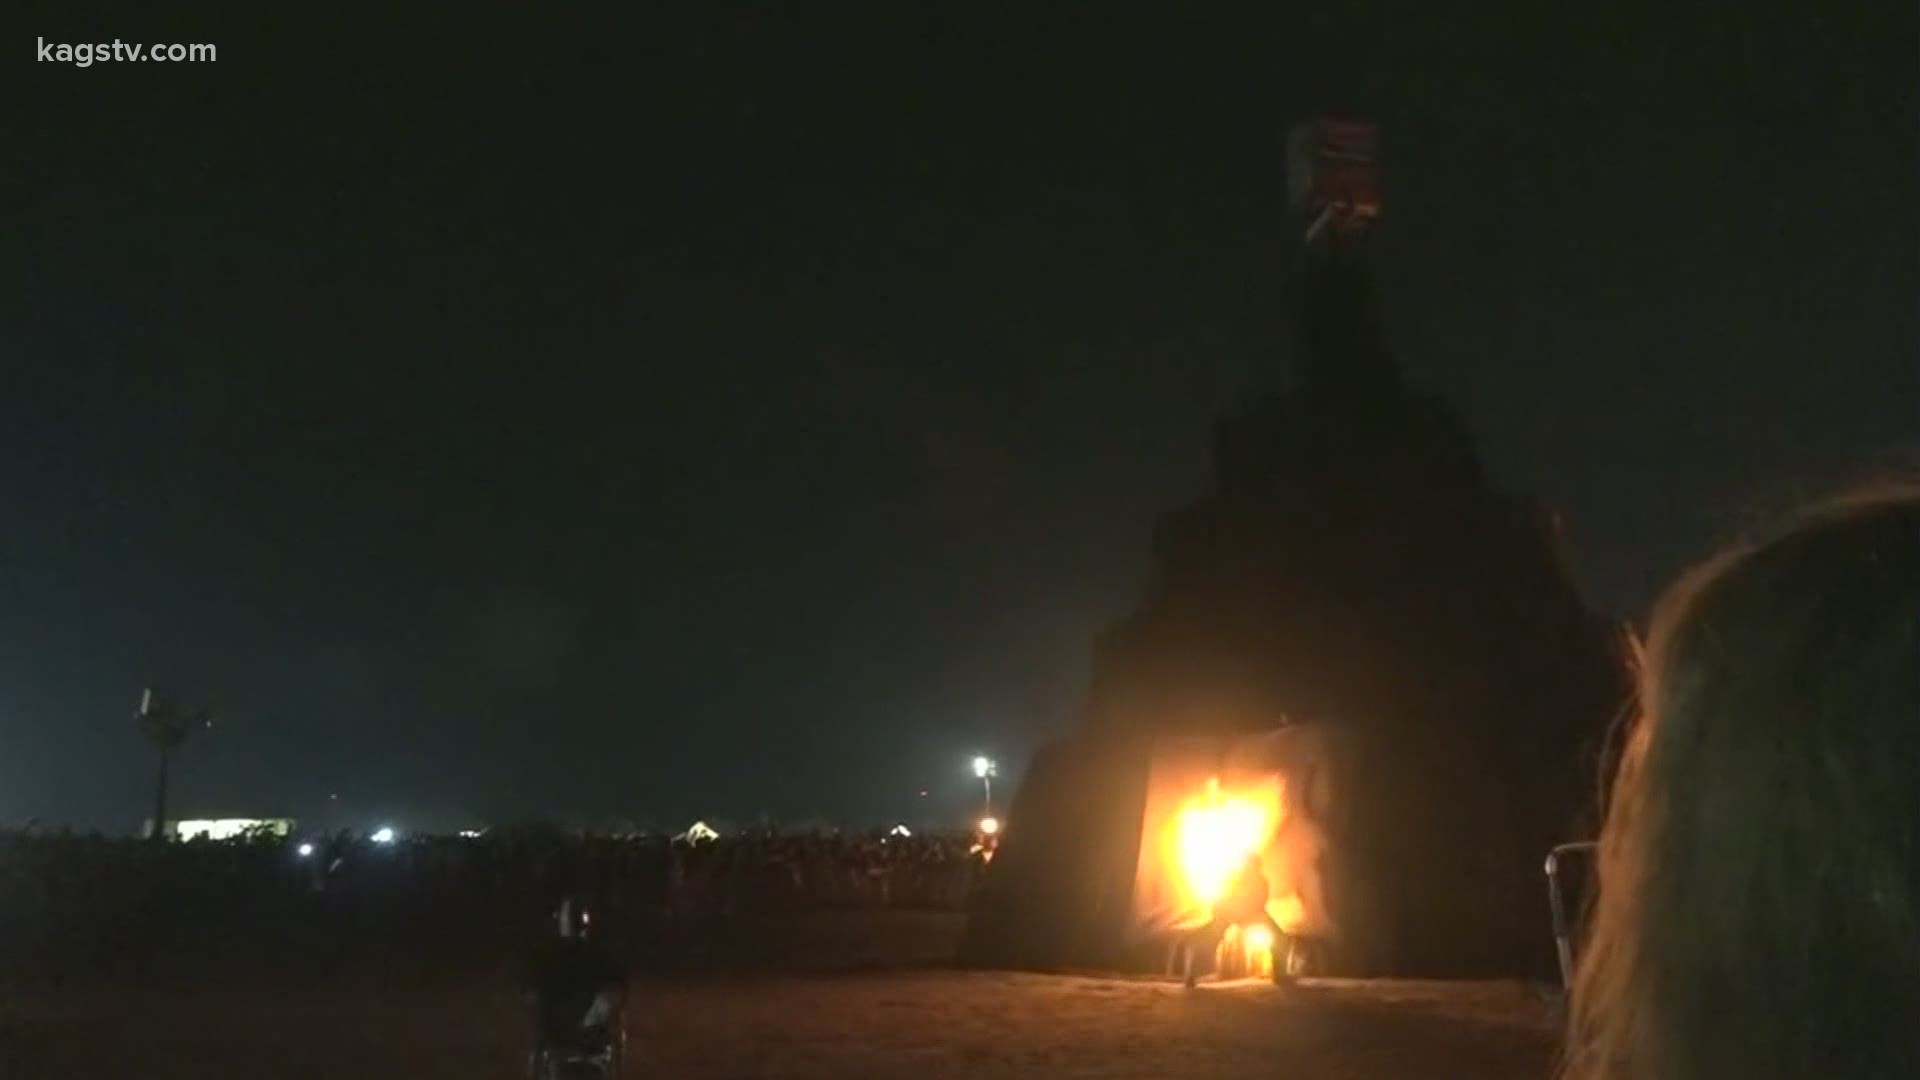 Texas A&M's Traditions Council and Student Bonfire both announced how Remembrance Ceremony and Burn Night will be handled this year.